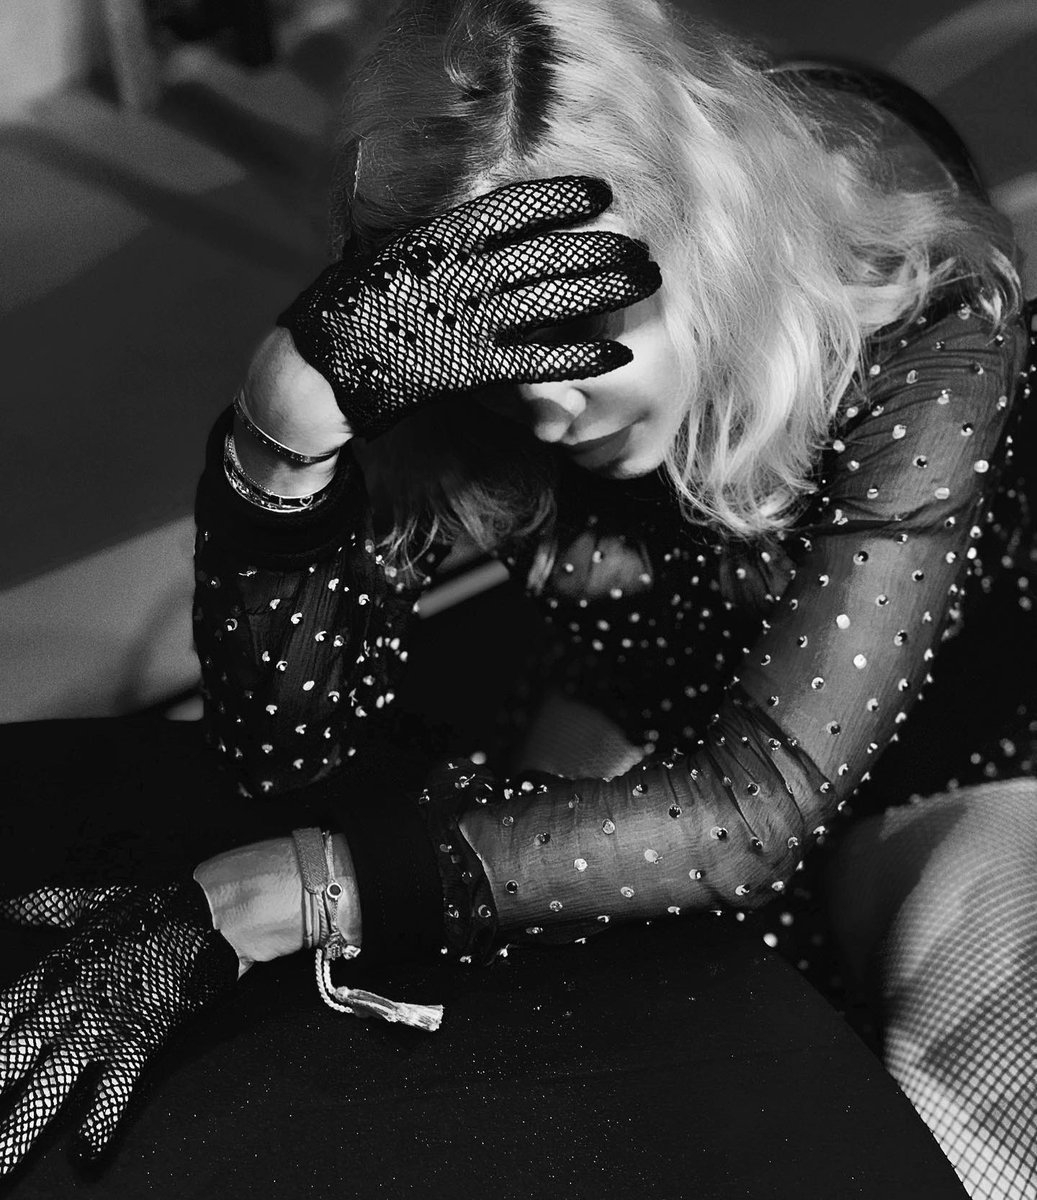 Madame ❌ is thinking about...................... #madamex #rehearsals https://t.co/tFo7iR4Foo